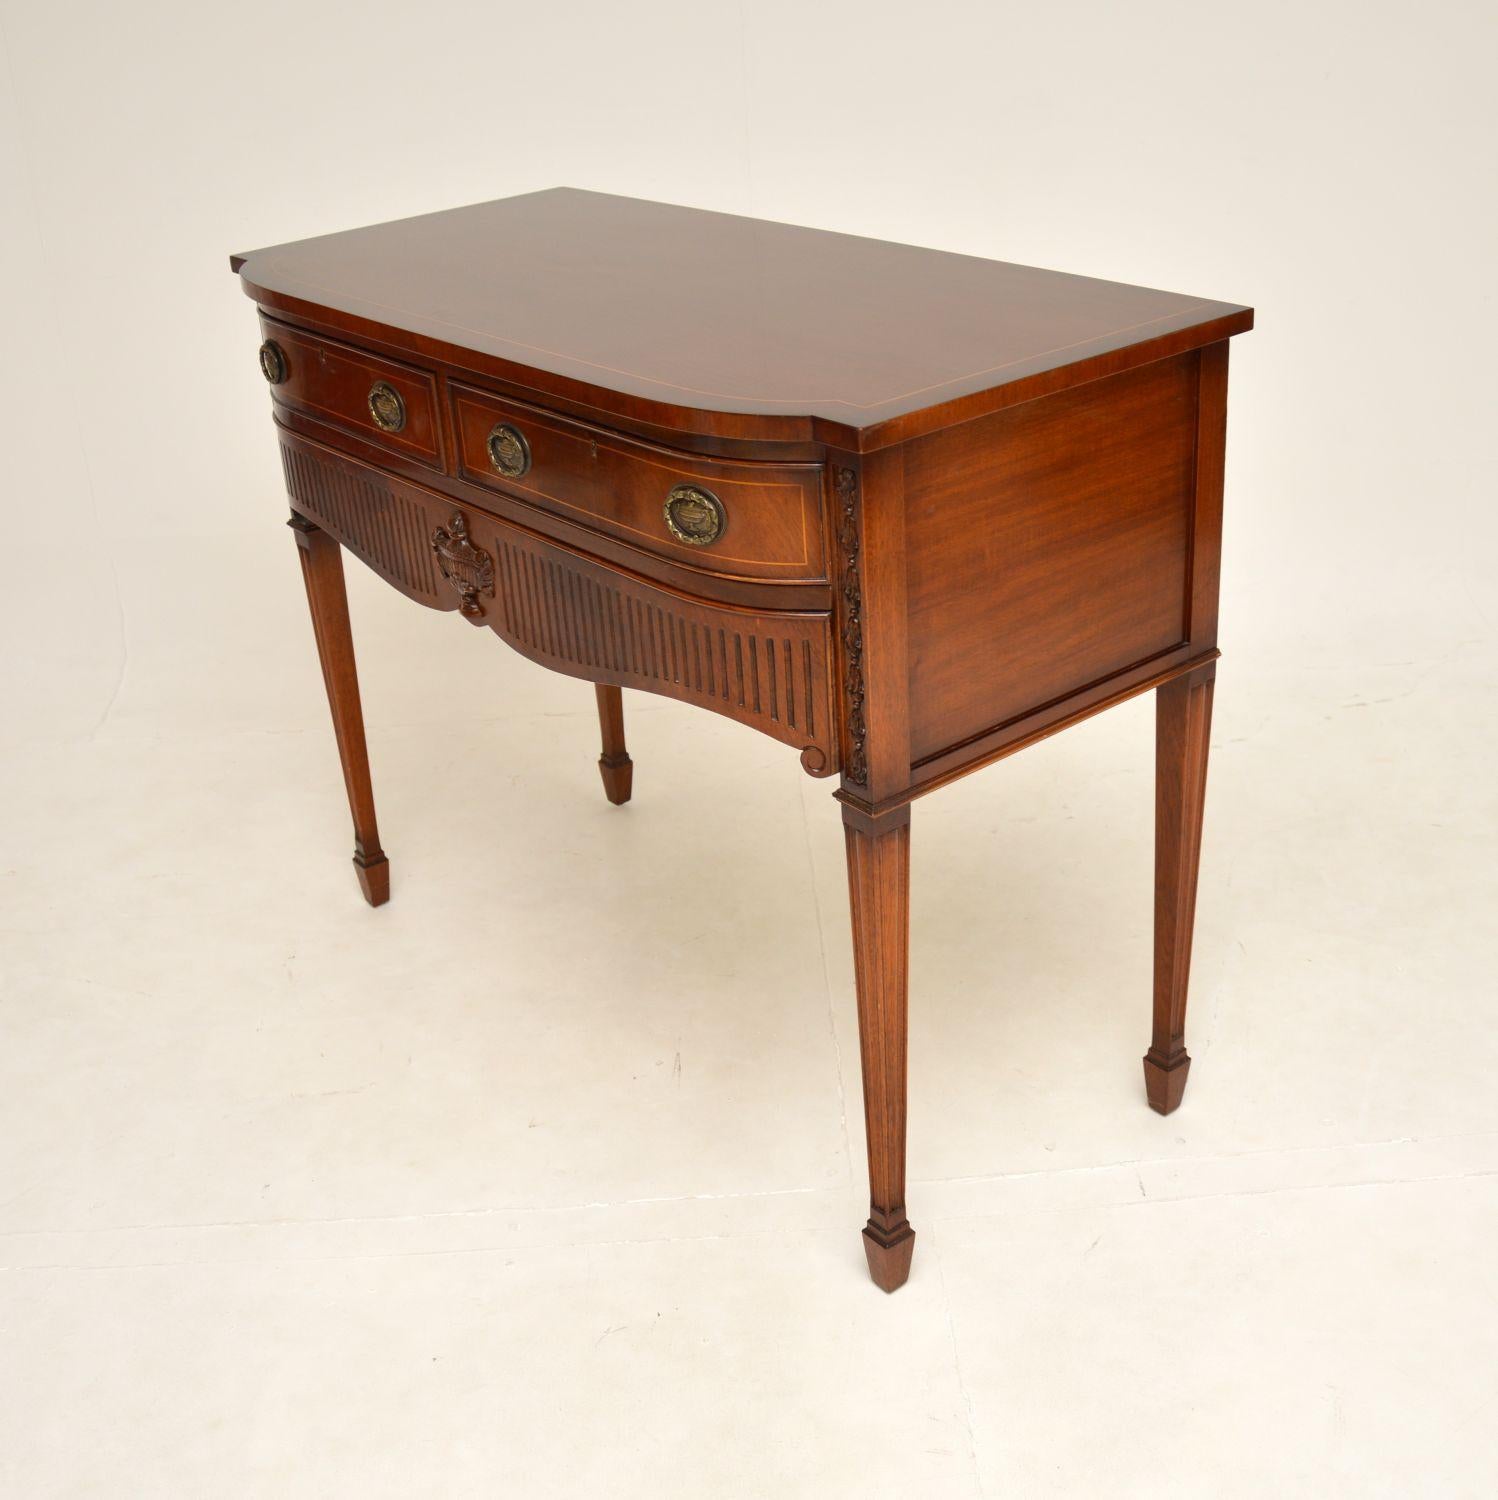 British Antique Inlaid Console / Server Table For Sale